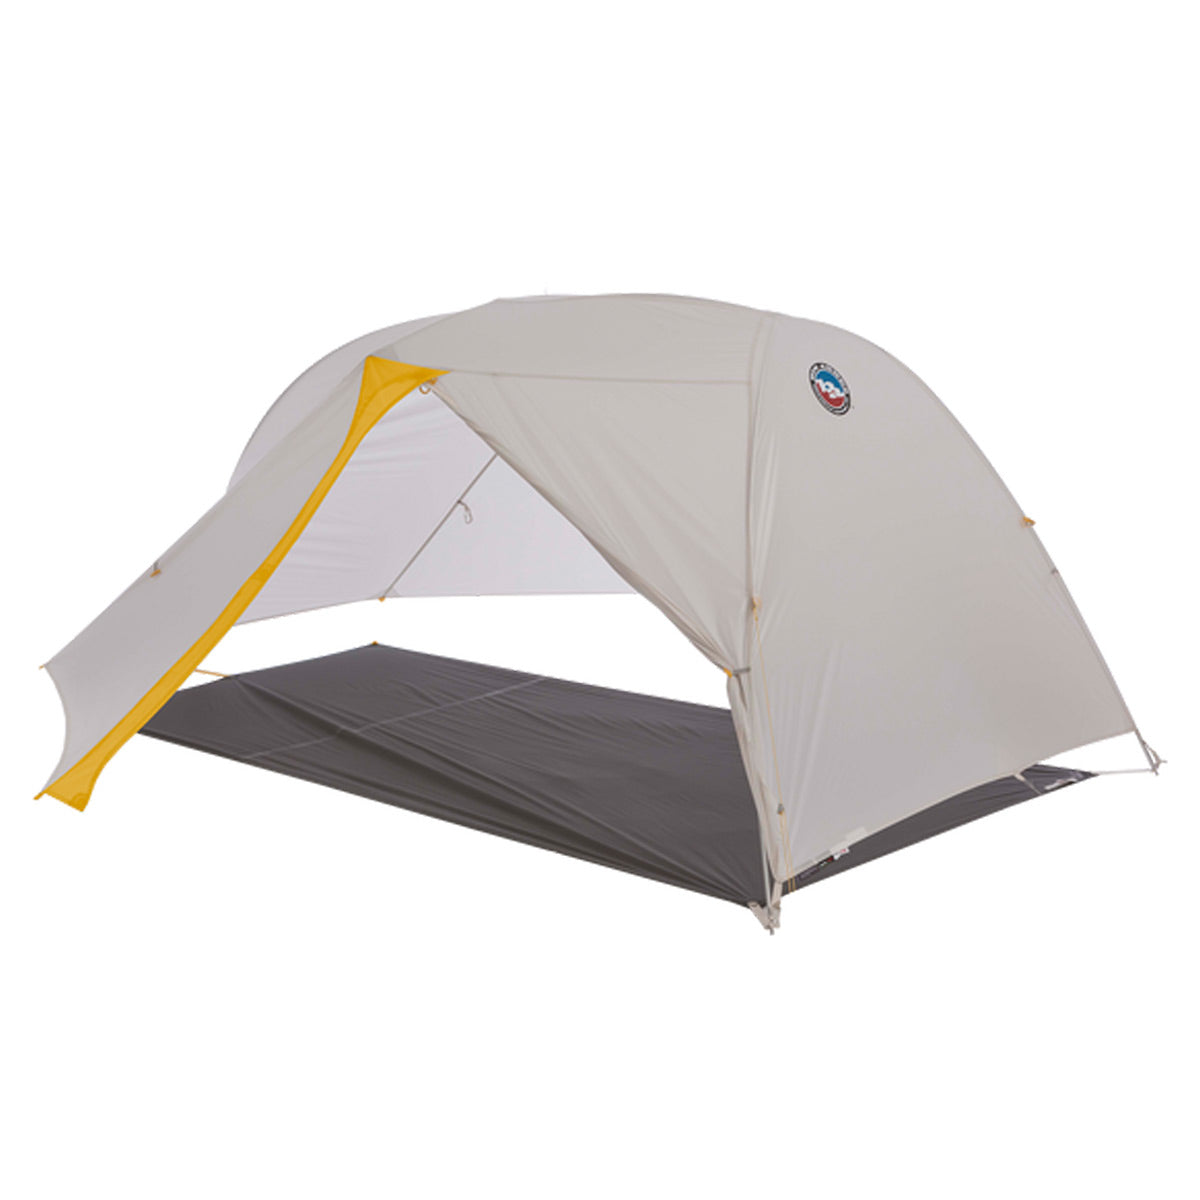 Big Agnes Tiger Wall UL 2 Person Solution Dye Tent in  by GOHUNT | Big Agnes - GOHUNT Shop